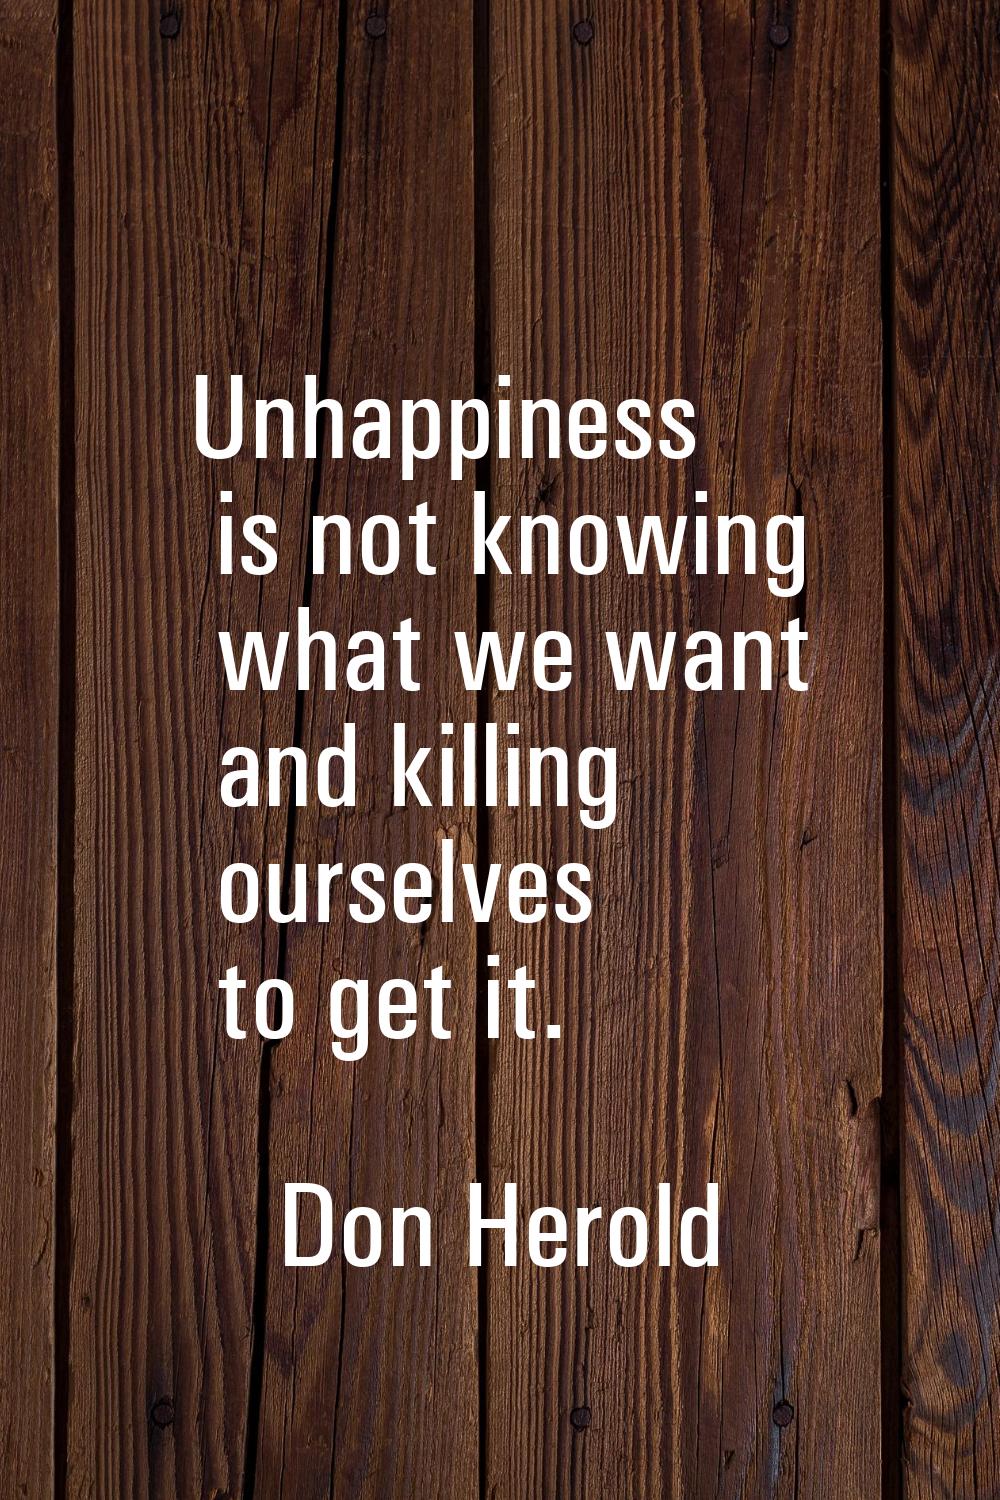 Unhappiness is not knowing what we want and killing ourselves to get it.